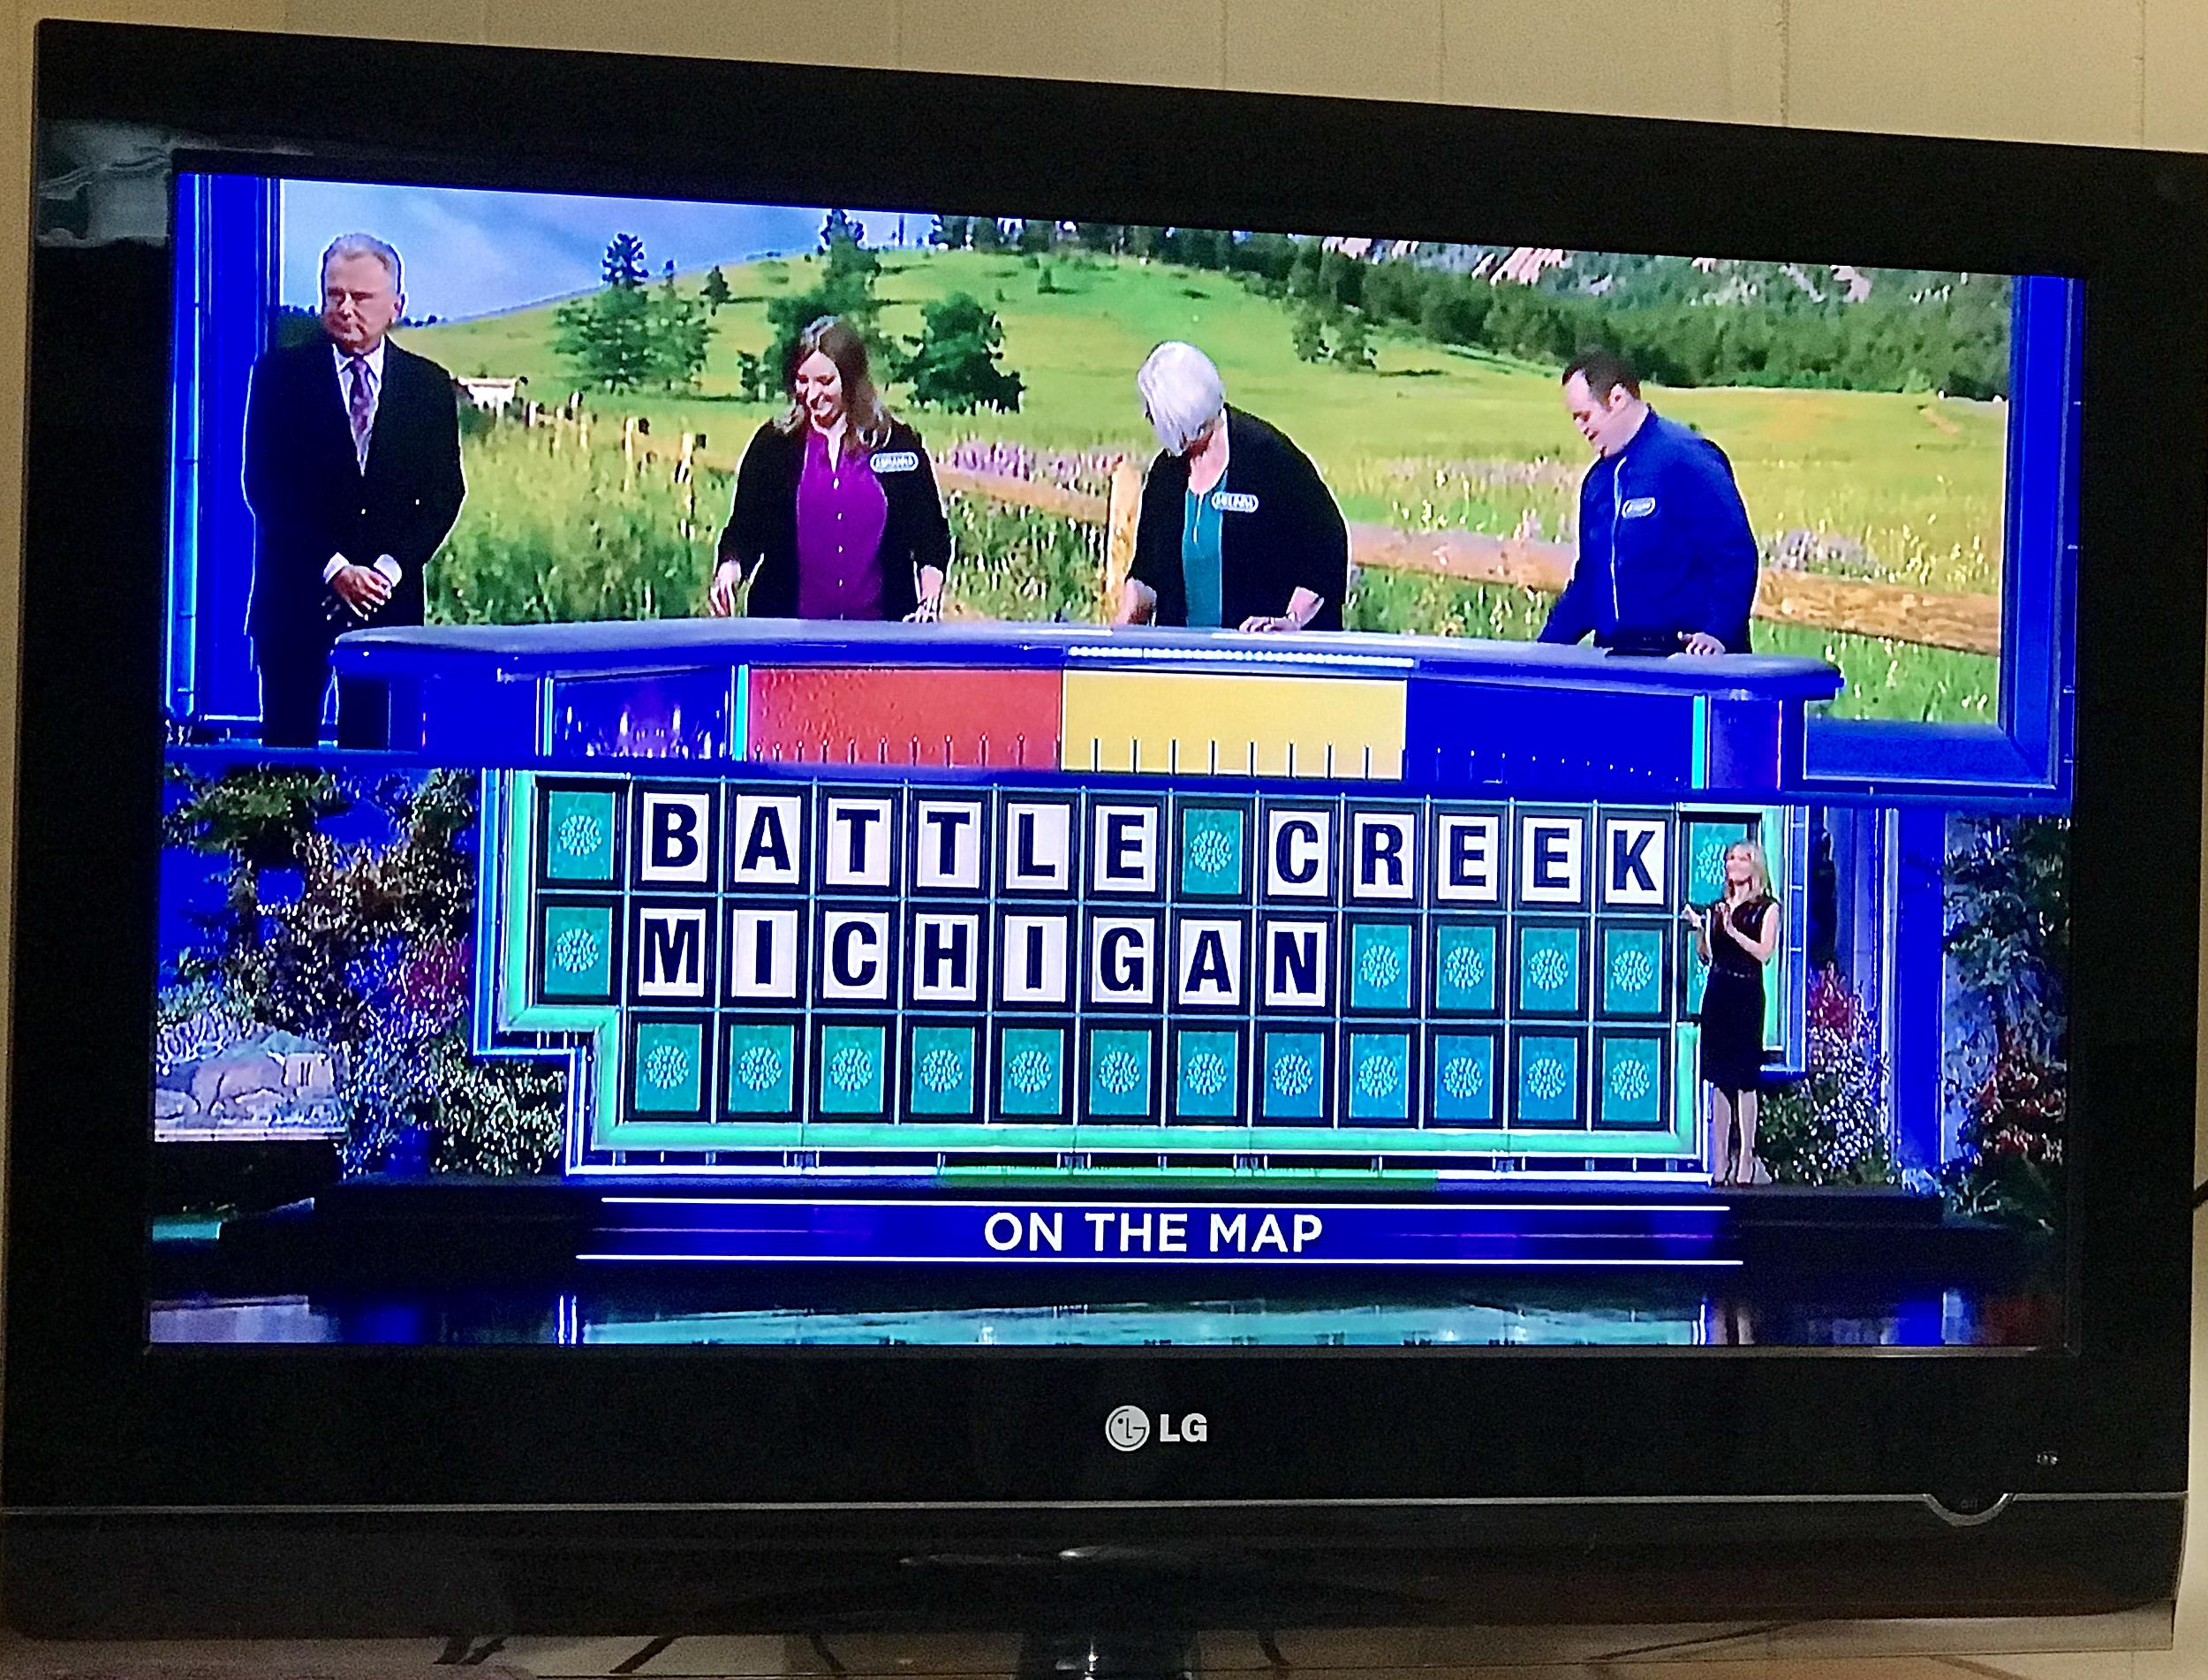 I'd Like To Solve The Puzzle... Battle Creek, Michigan!